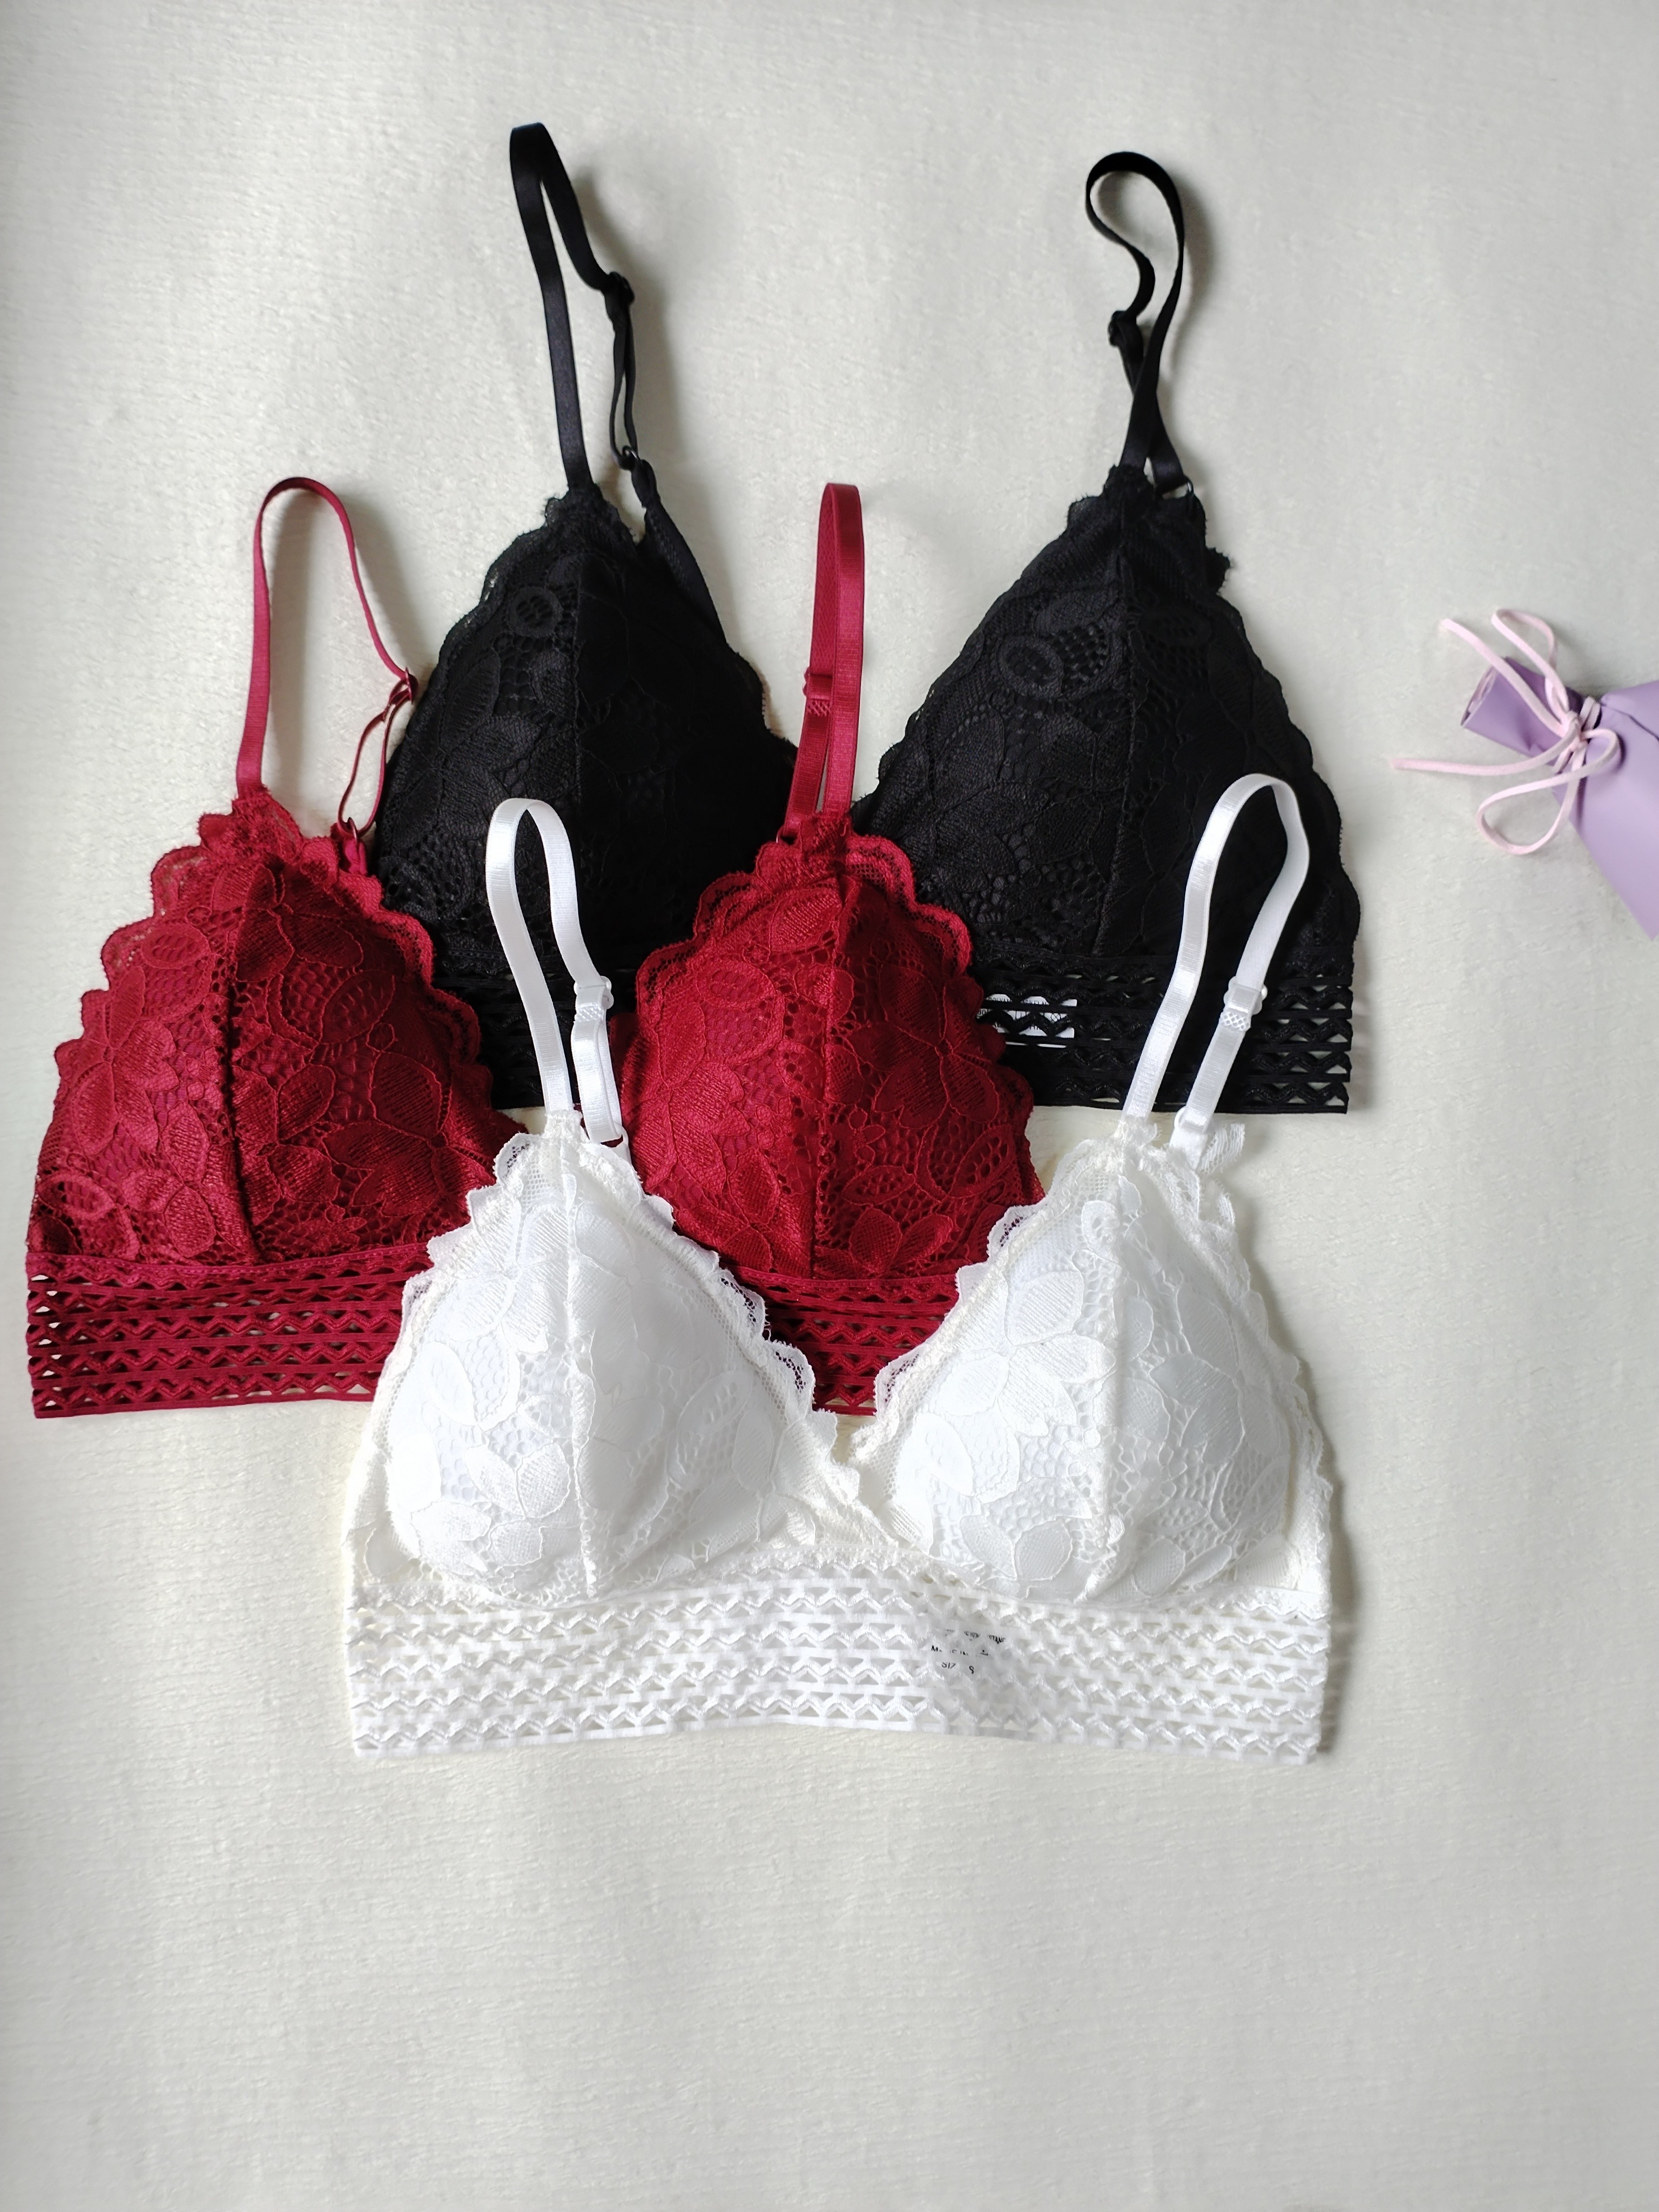 Cutout Floral Lace Wireless Bras Comfy Breathable Intimates - Temu